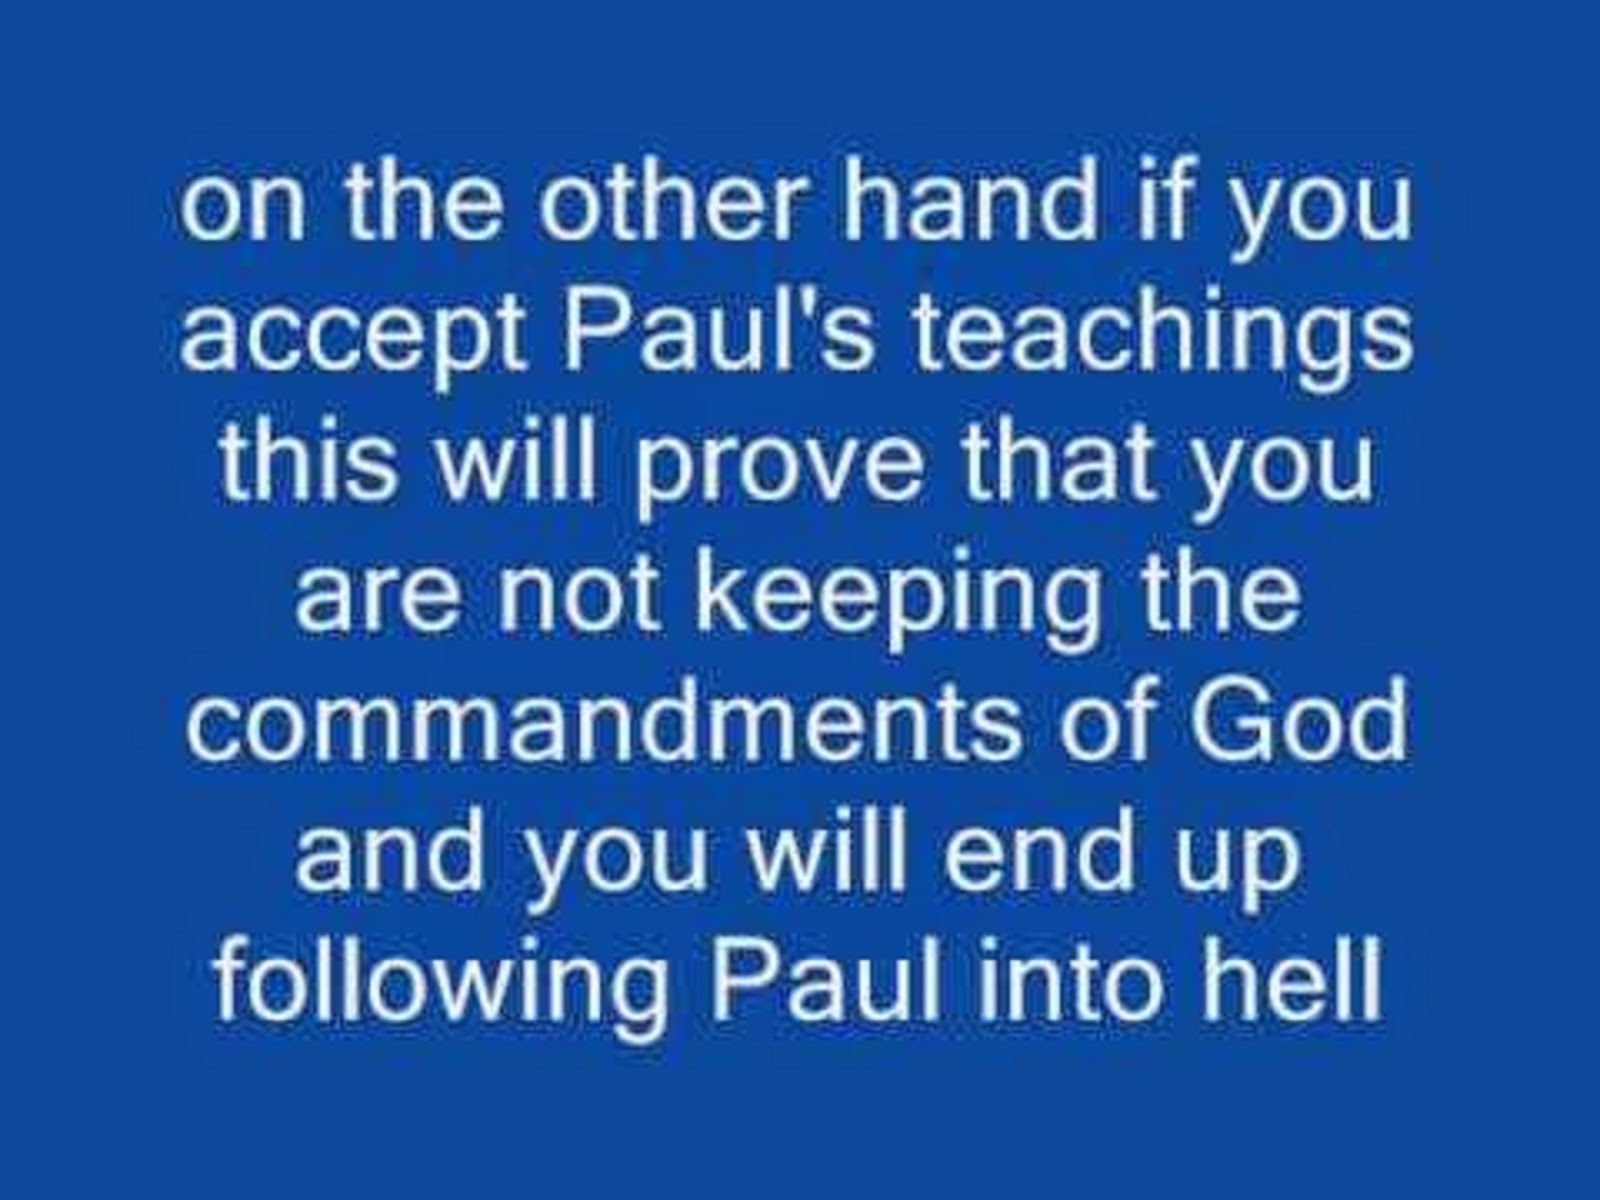 FOLLOW PAUL TO HELL